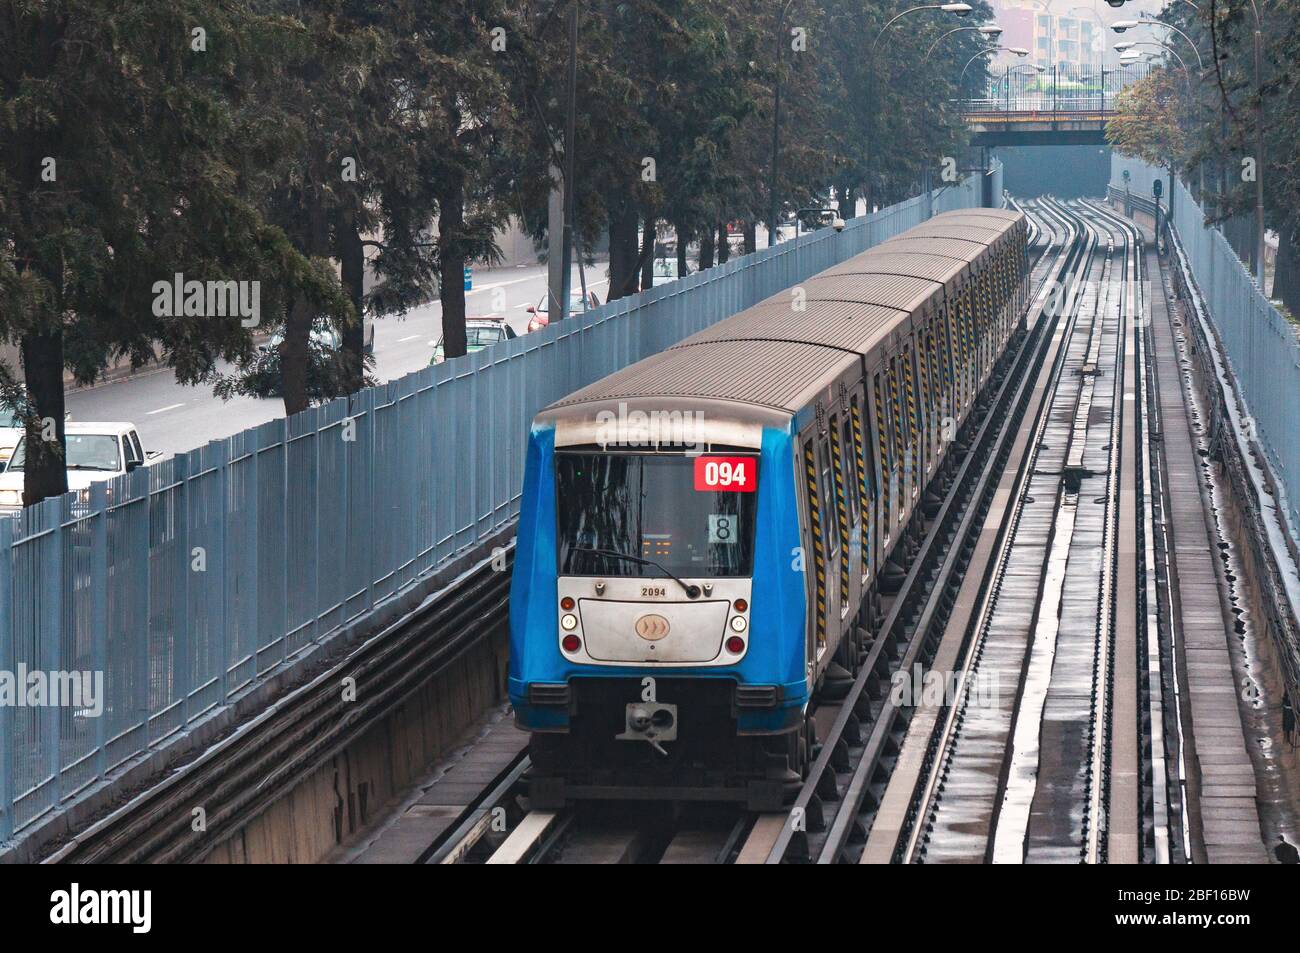 SANTIAGO, CHILE - MAY 2016: A Metro de Santiago train at a station of Line 2 Stock Photo